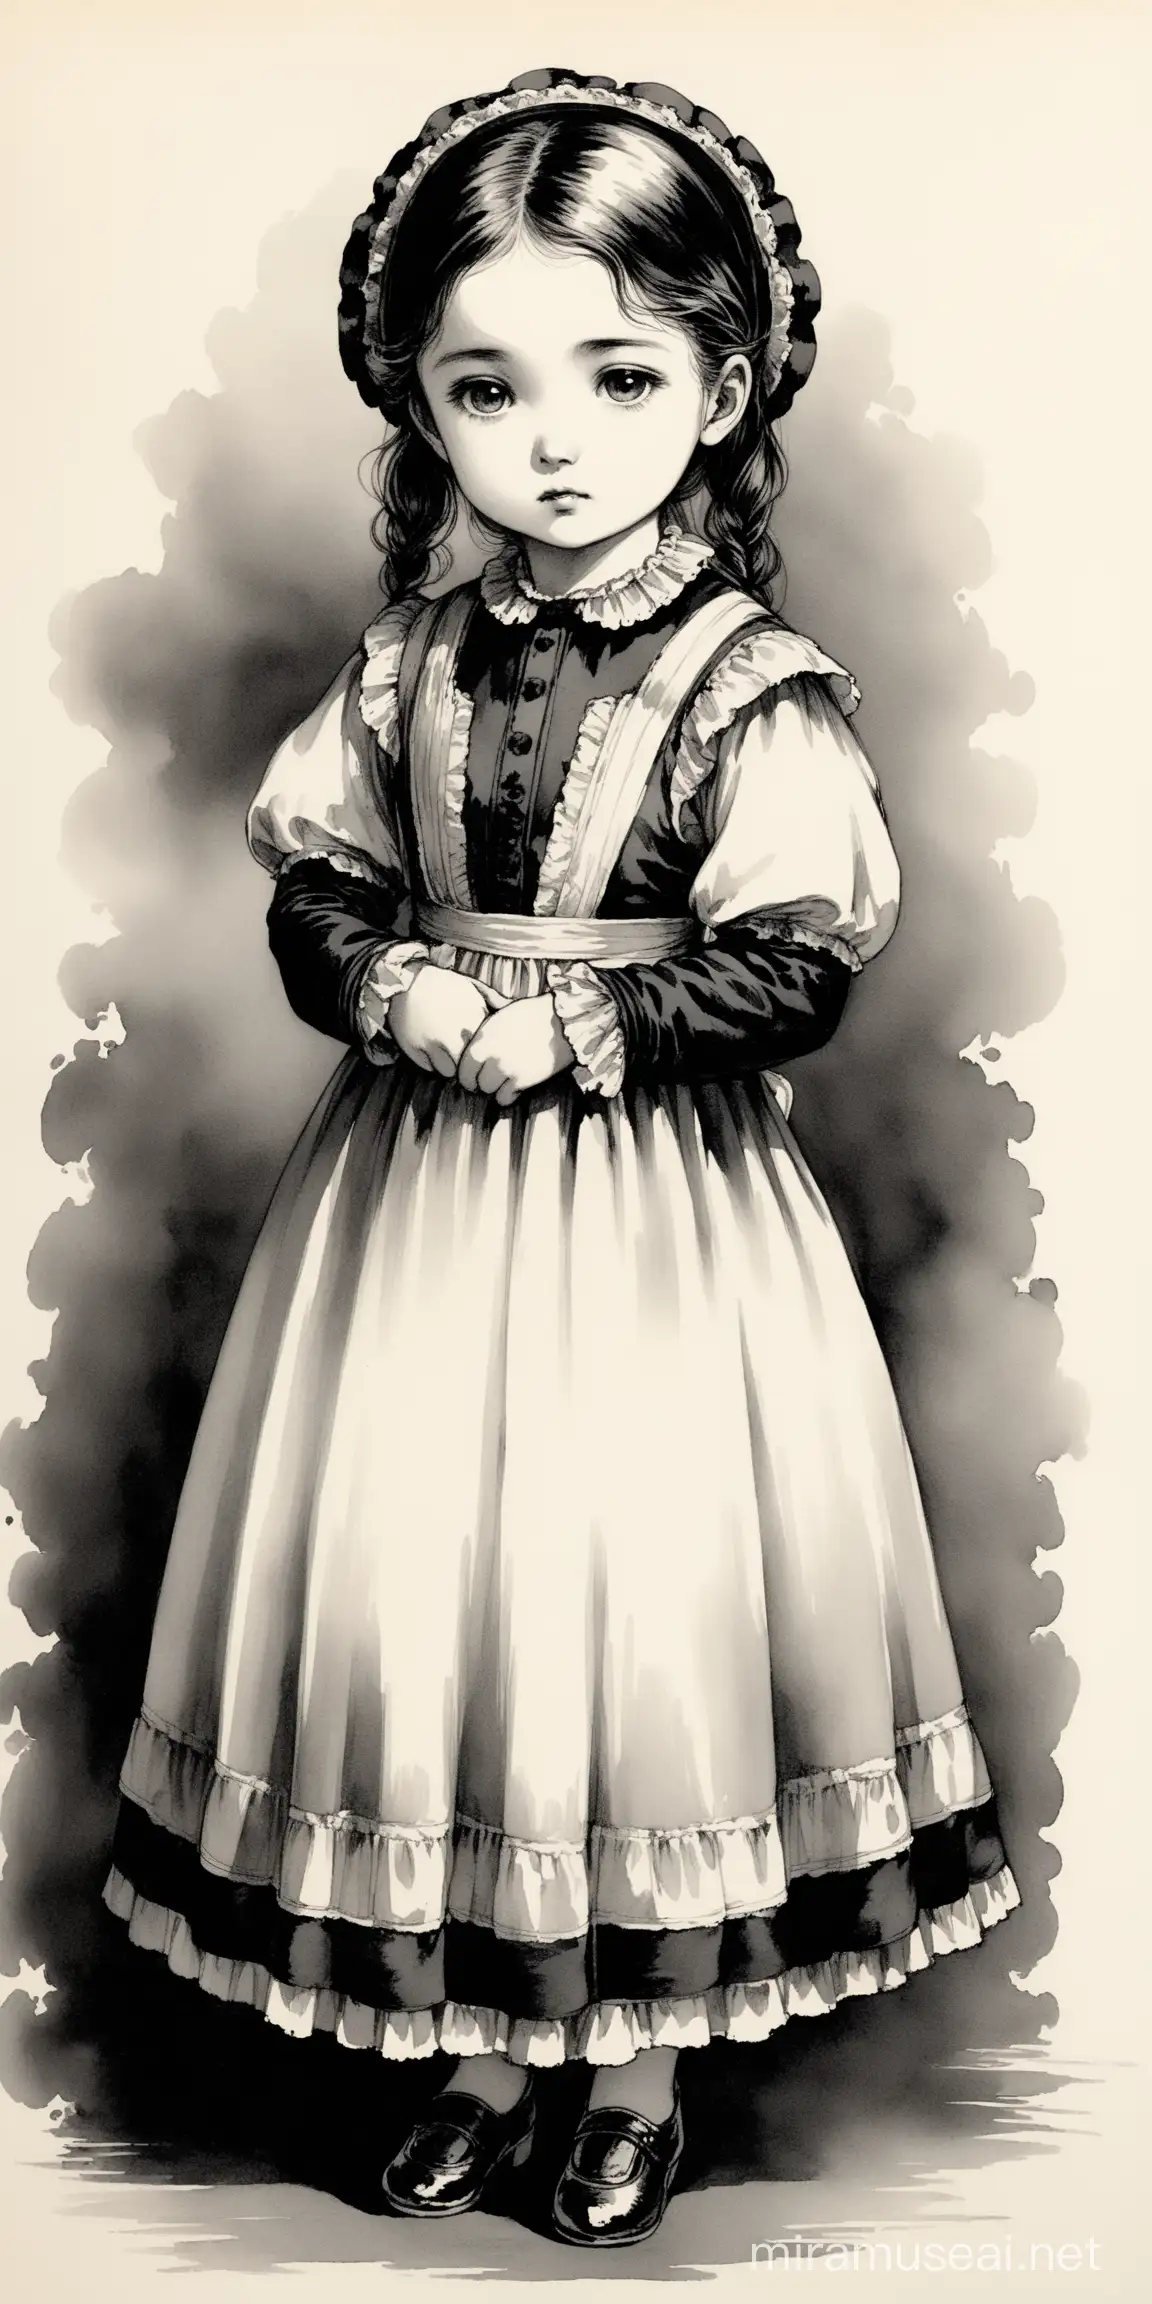 Young orphan girl, Victorian era, ink painting, black and white